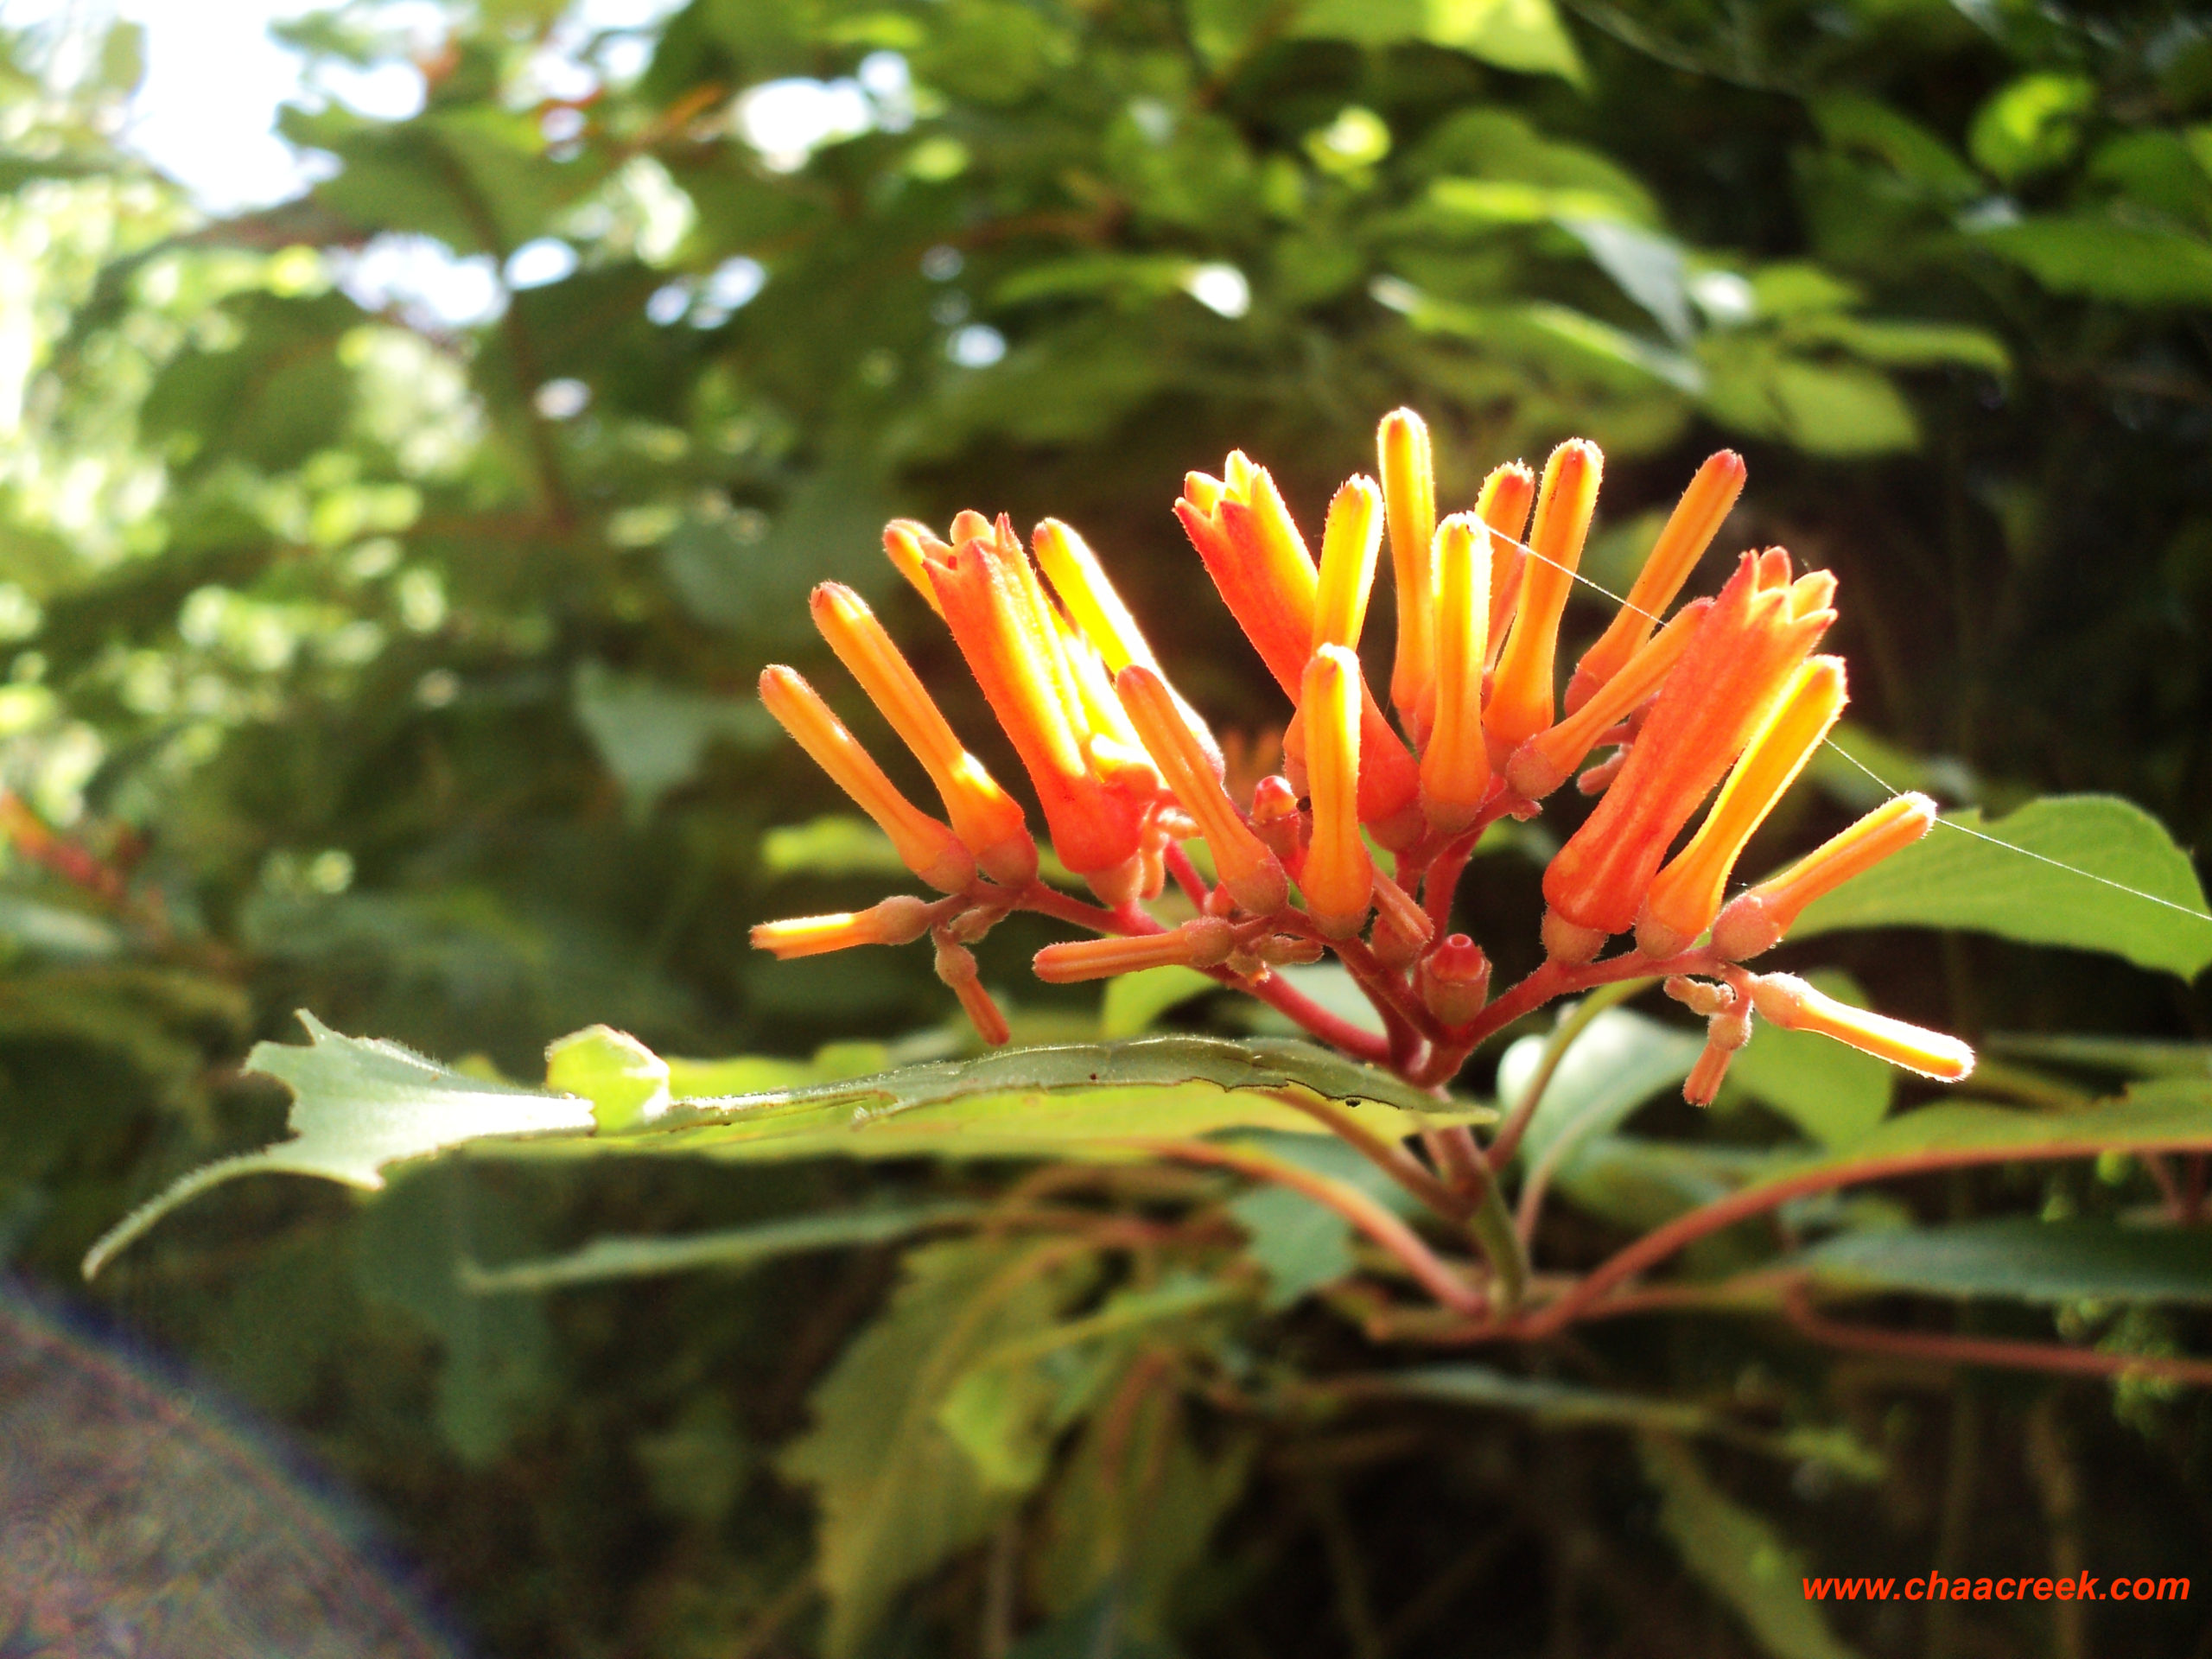 Ixcanan aka Polly Red Head : An Important Medicinal Rainforest Plant in Belize